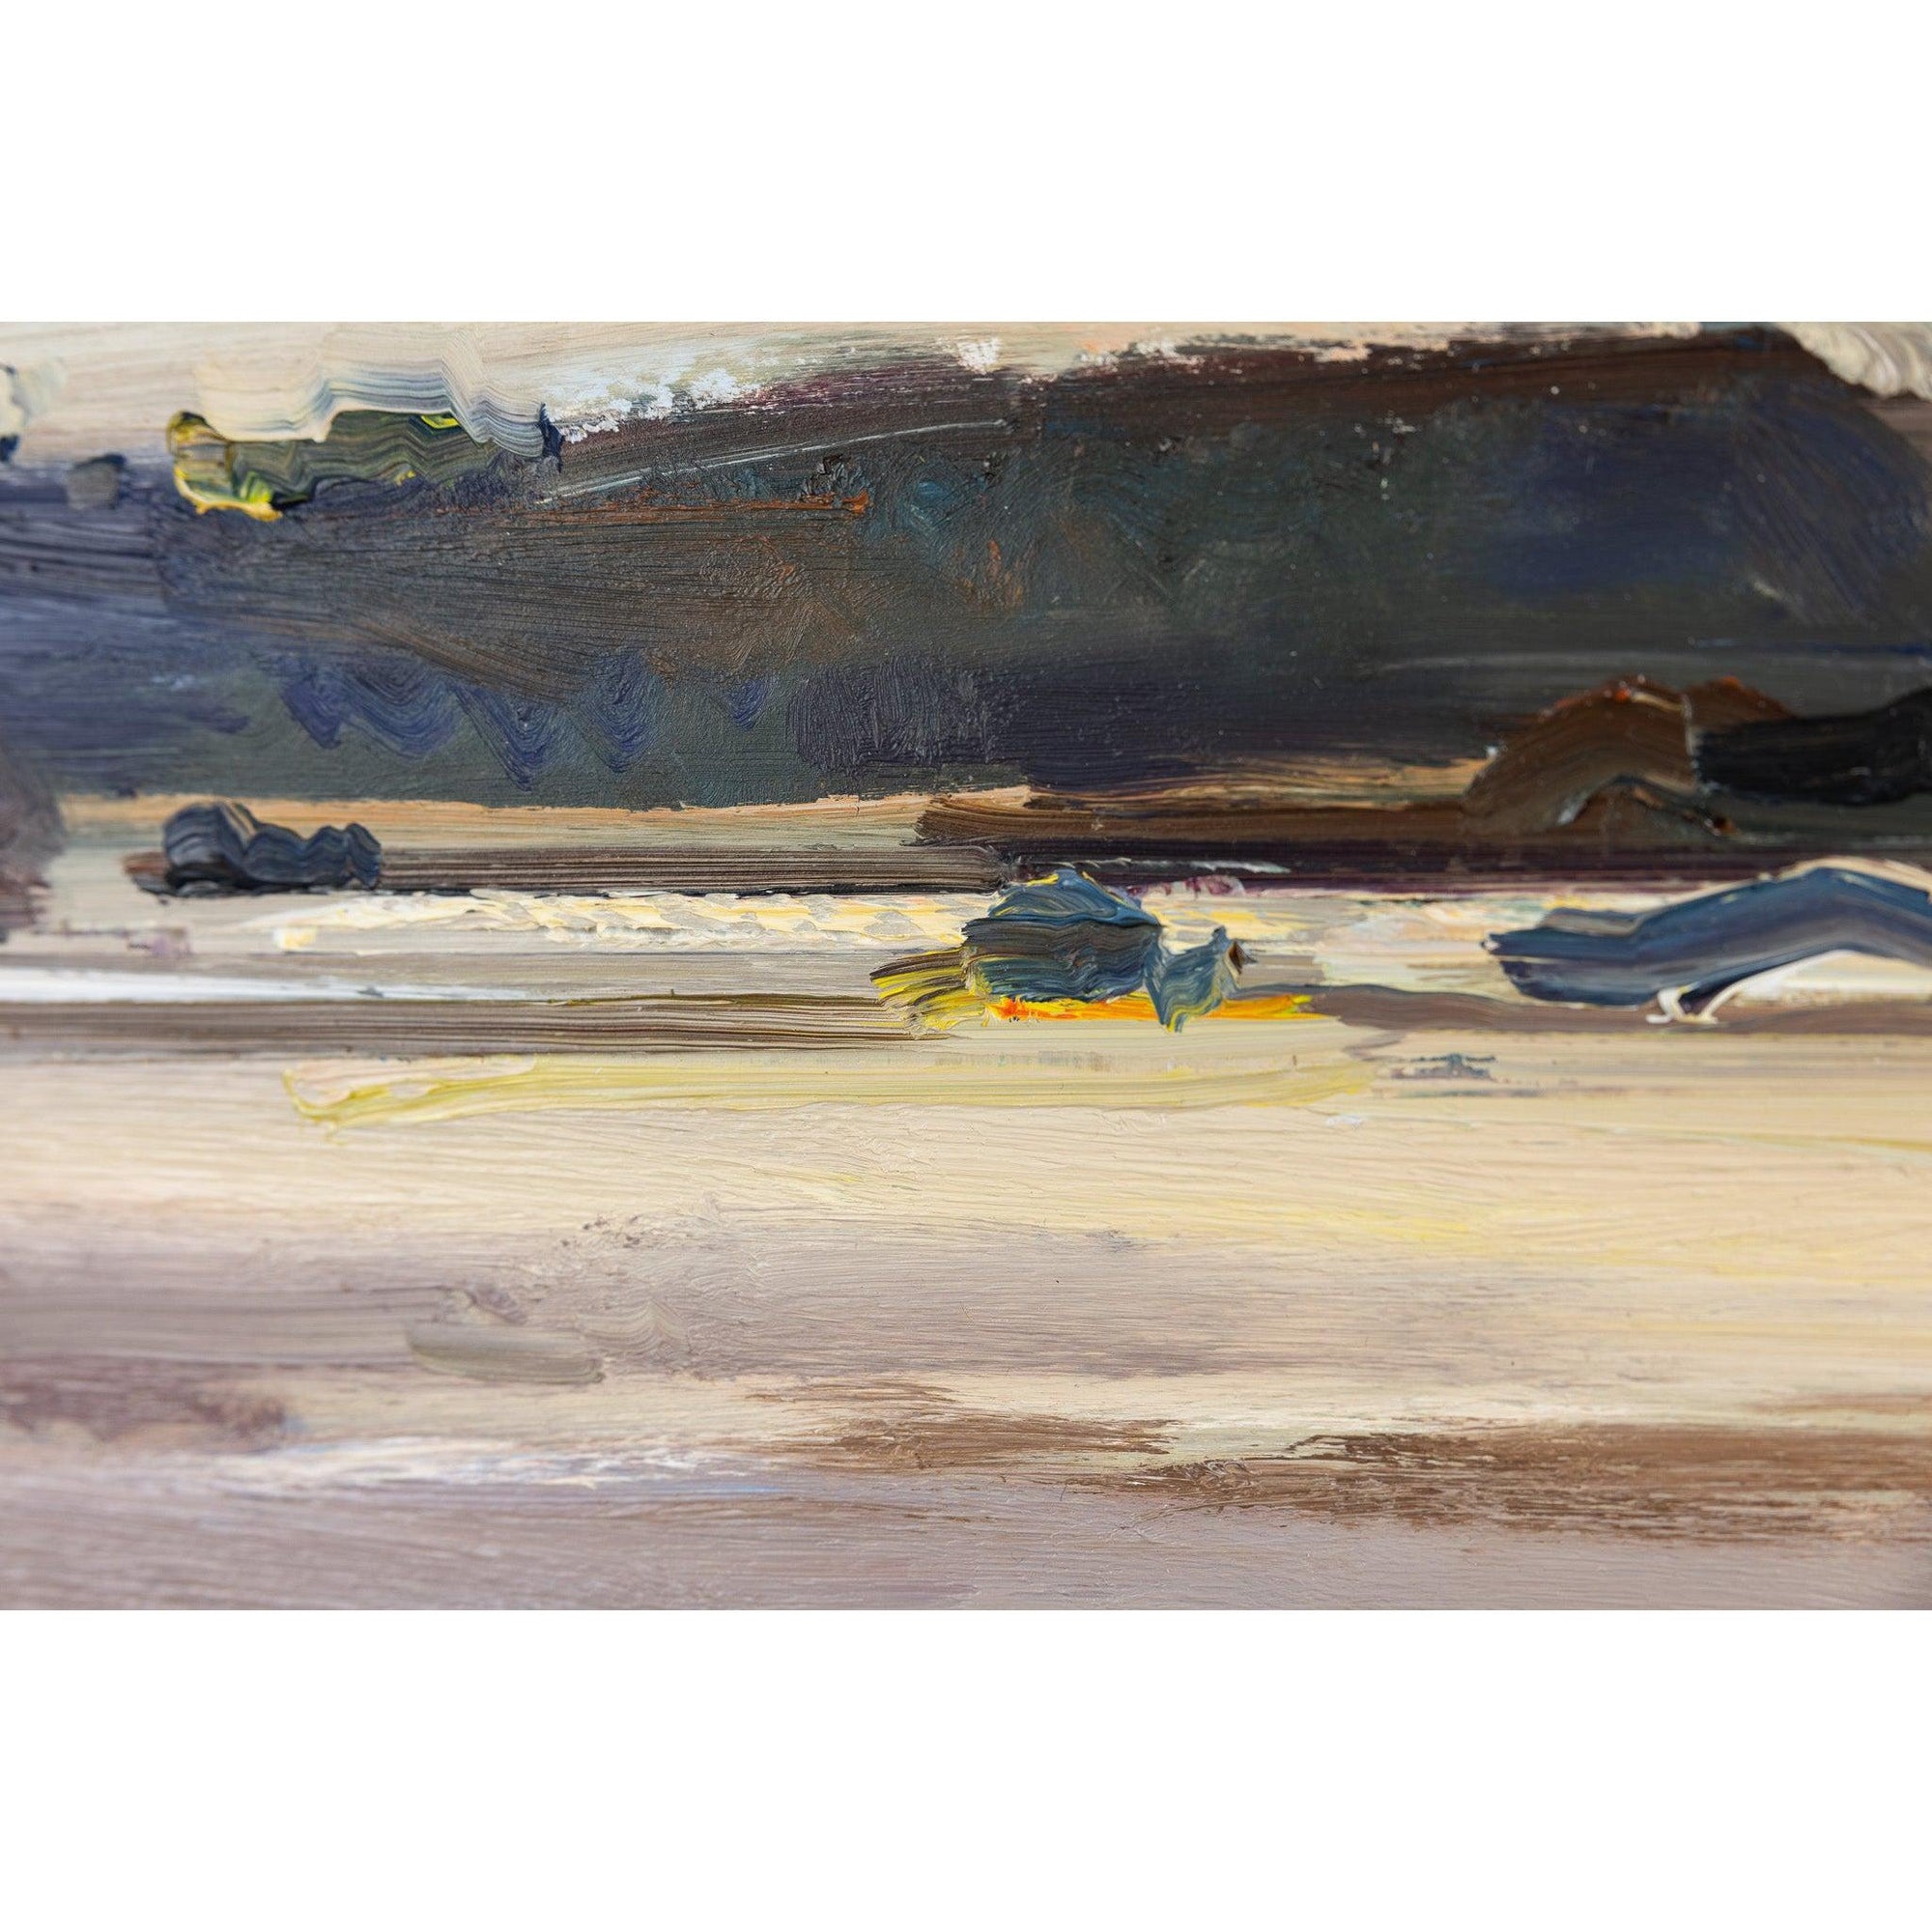 'Sunset, Trevone Beach' oil on board original by David Atkins, available at Padstow Gallery, Cornwall